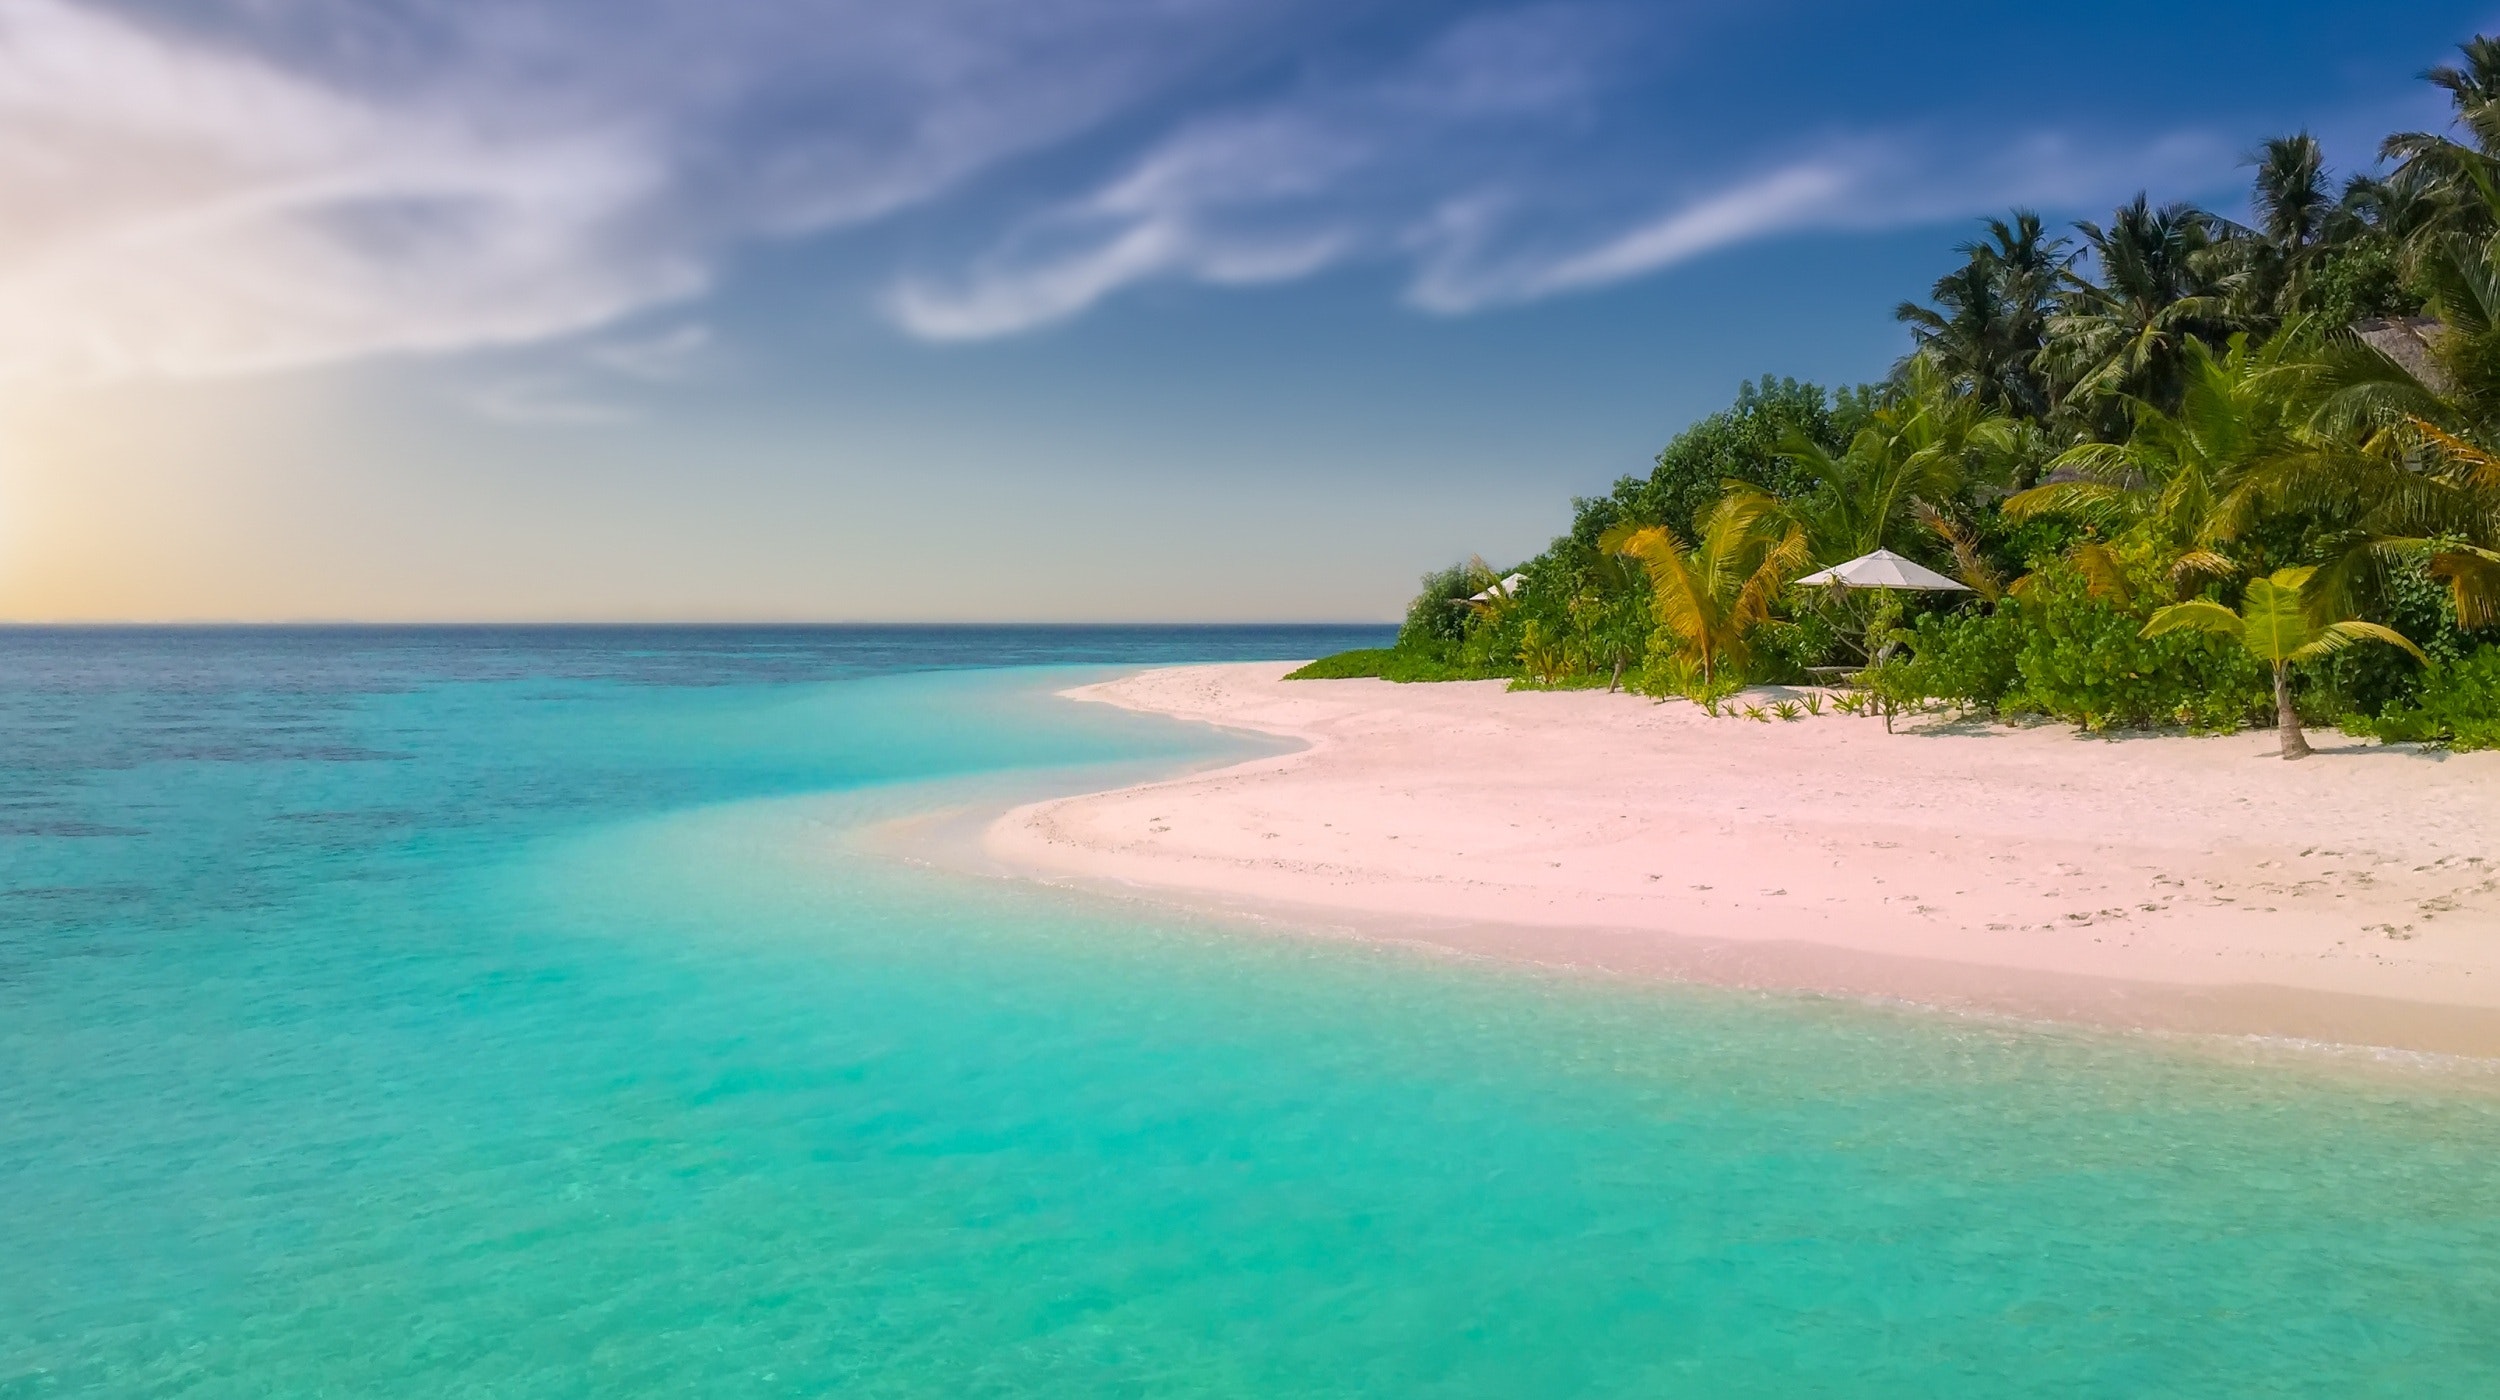 Tropical island photos download the best free tropical island stock photos hd images